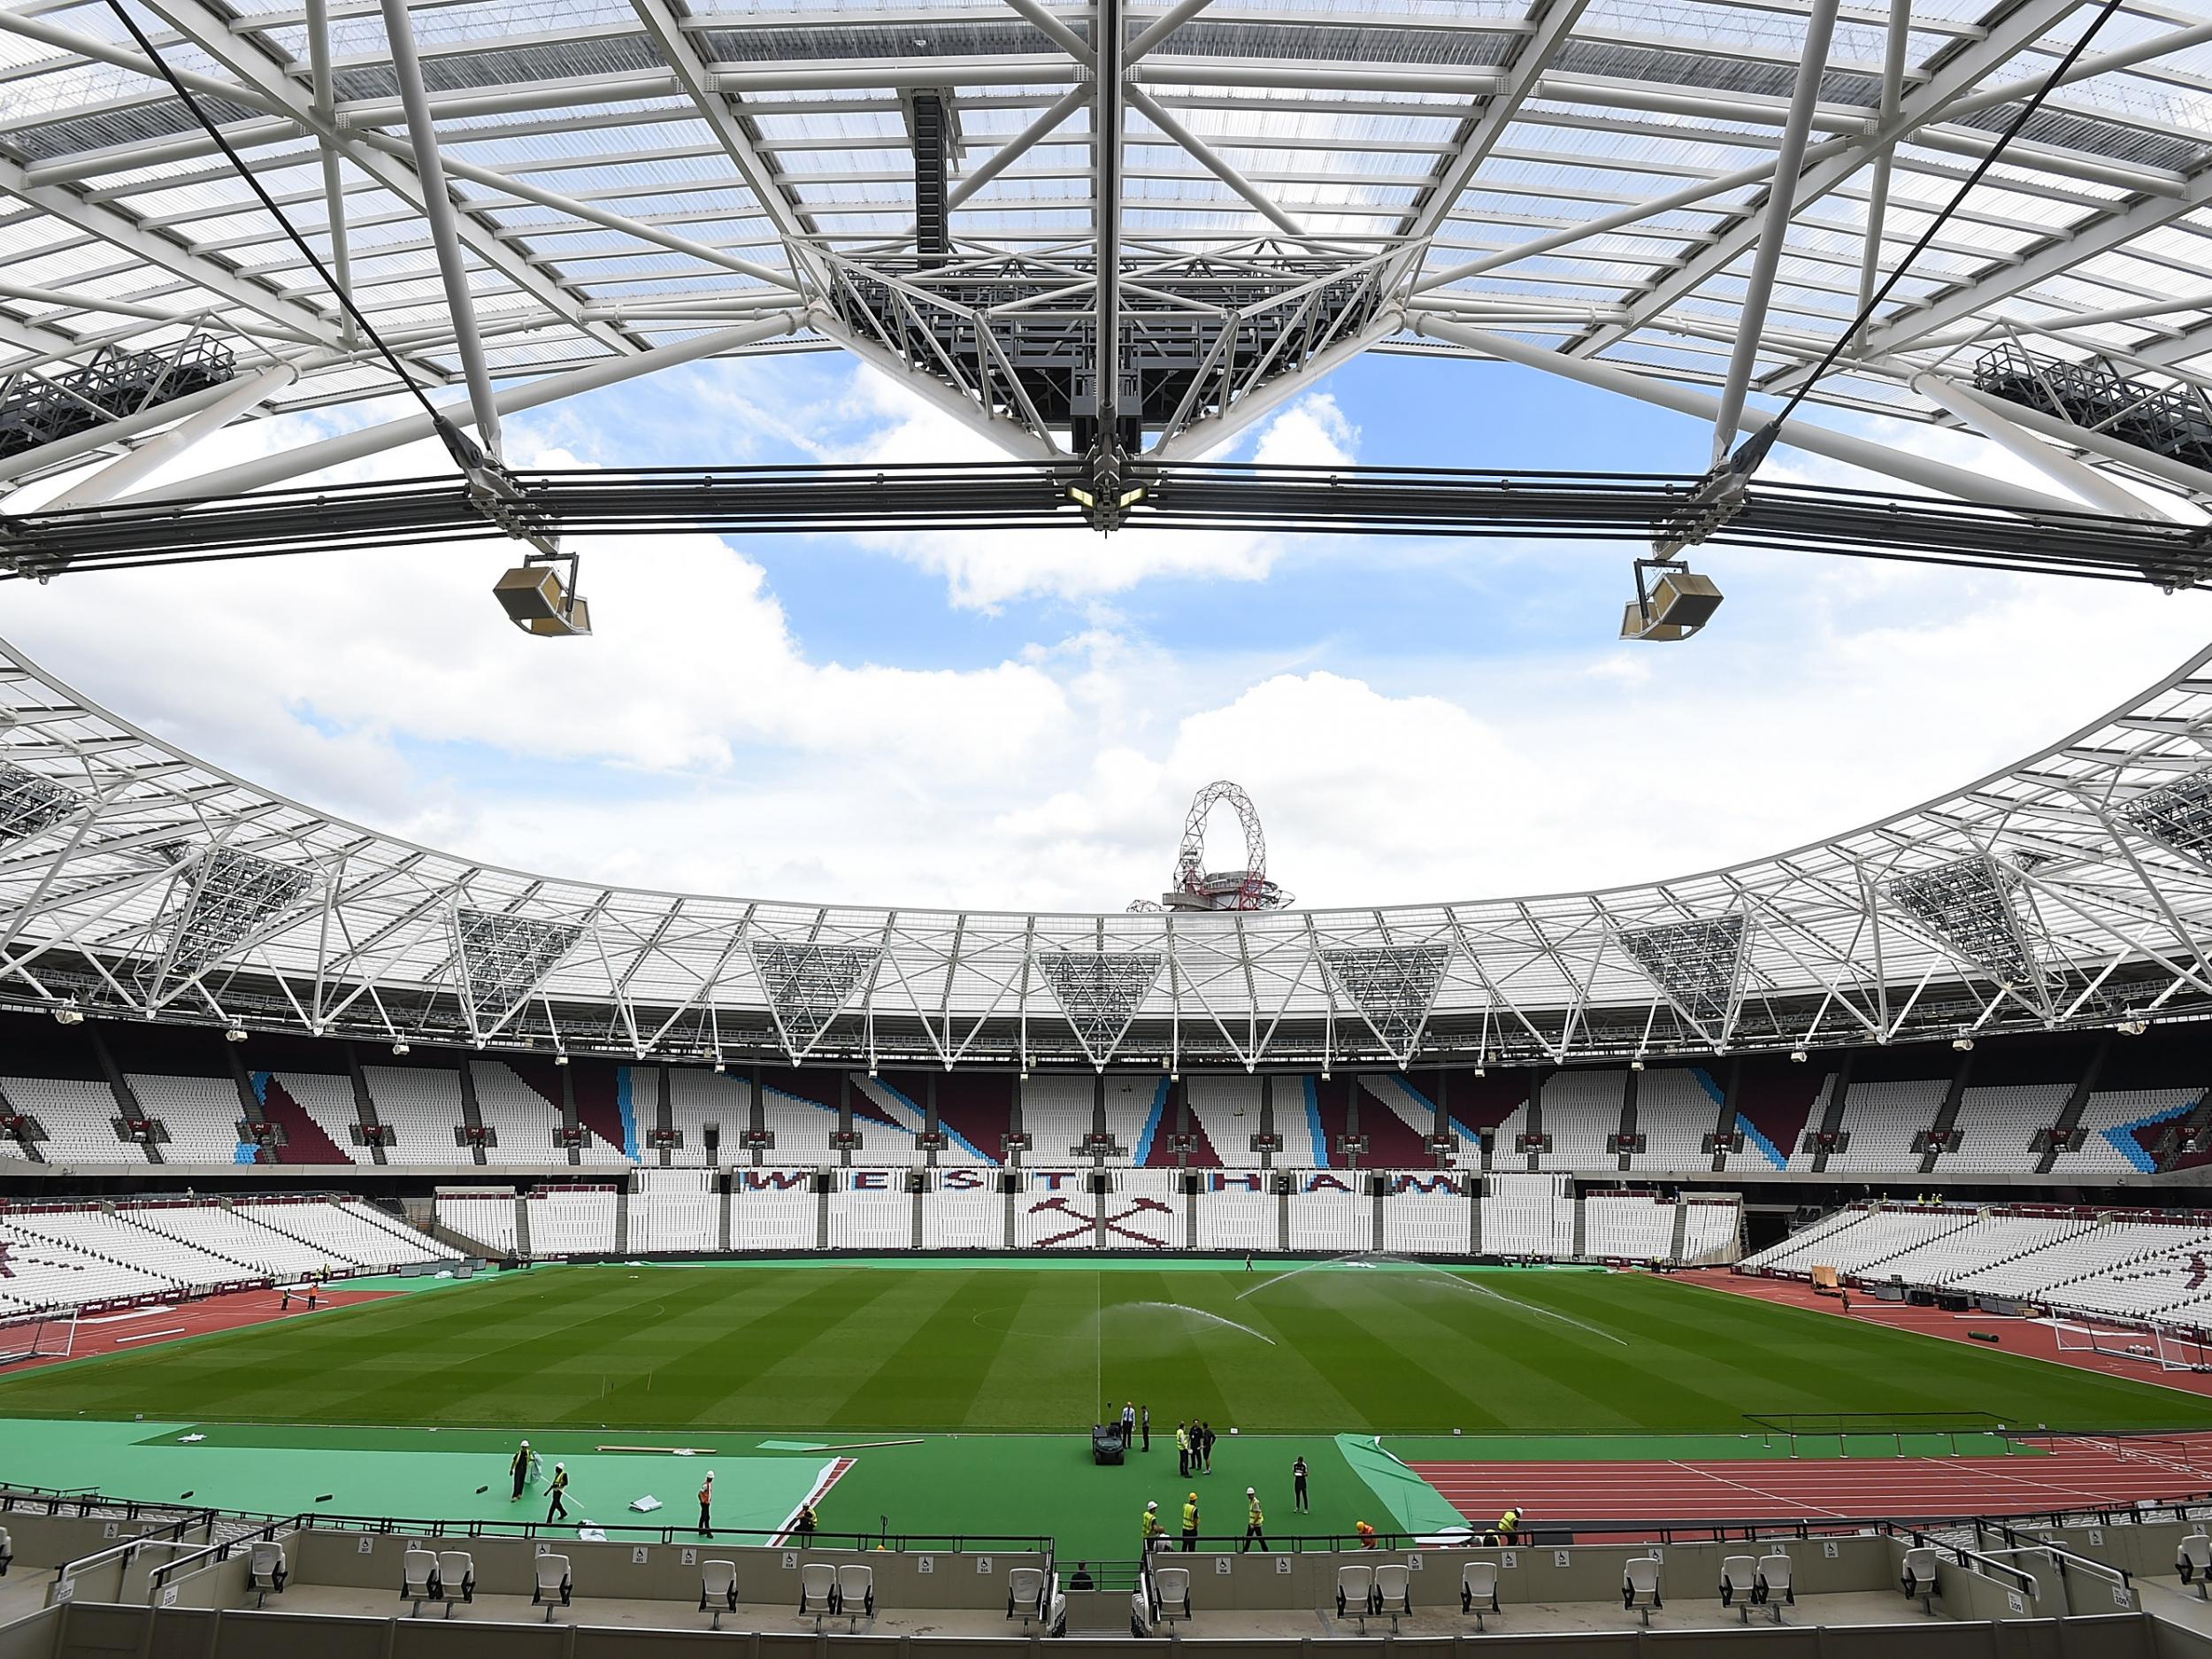 West Ham moved to the 80,000 seater stadium from Upton Park